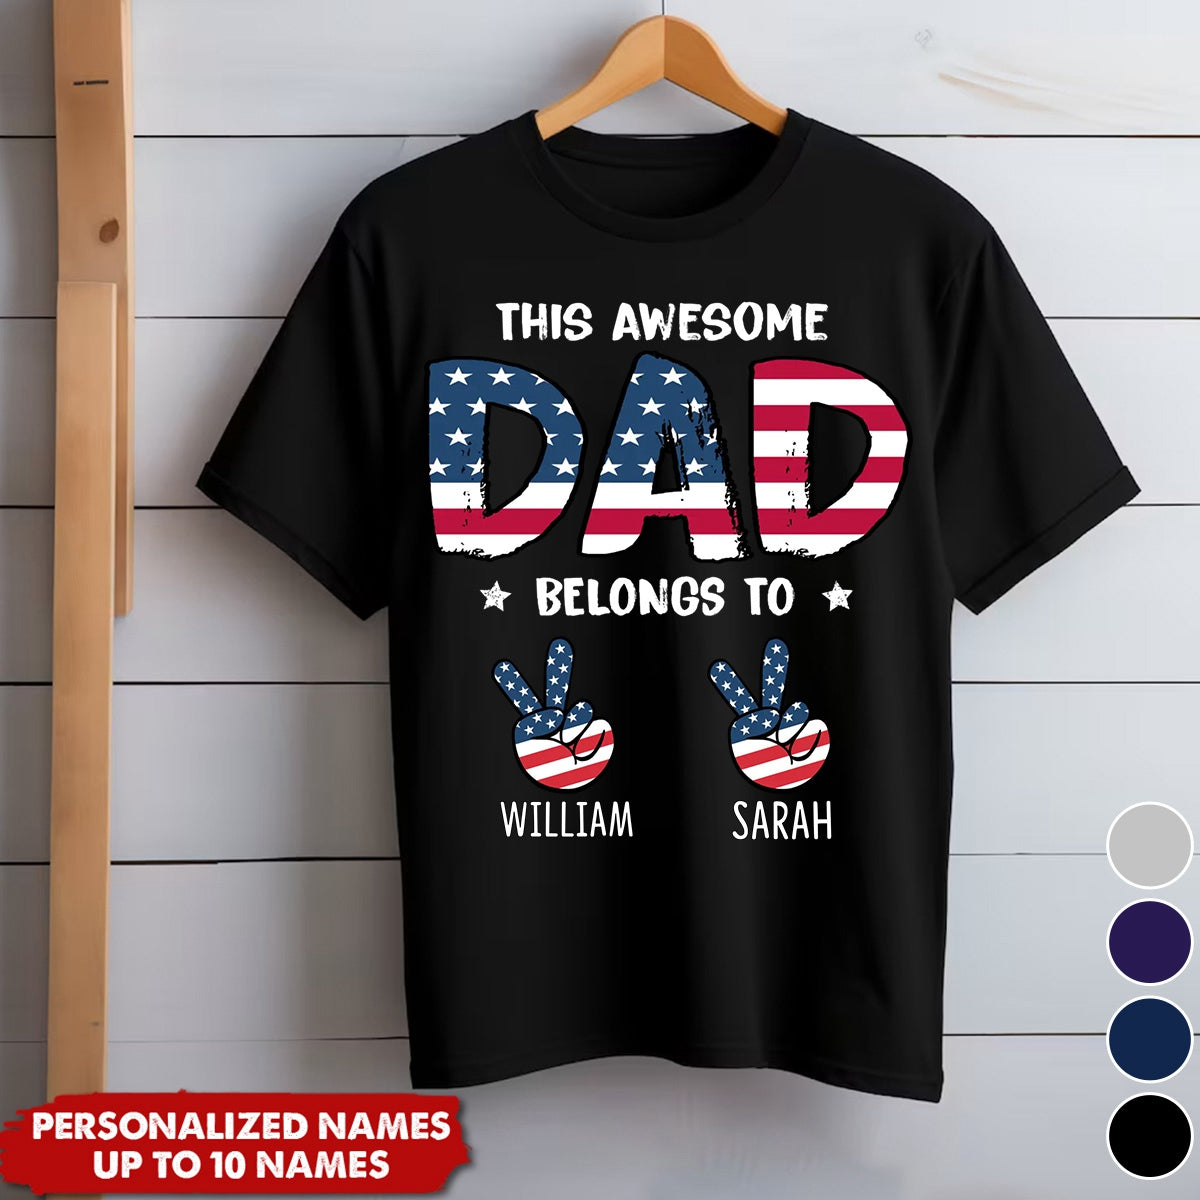 You Are Always Awesome To Us - Family Personalized T-shirt - Gift For Dad, Grandpa